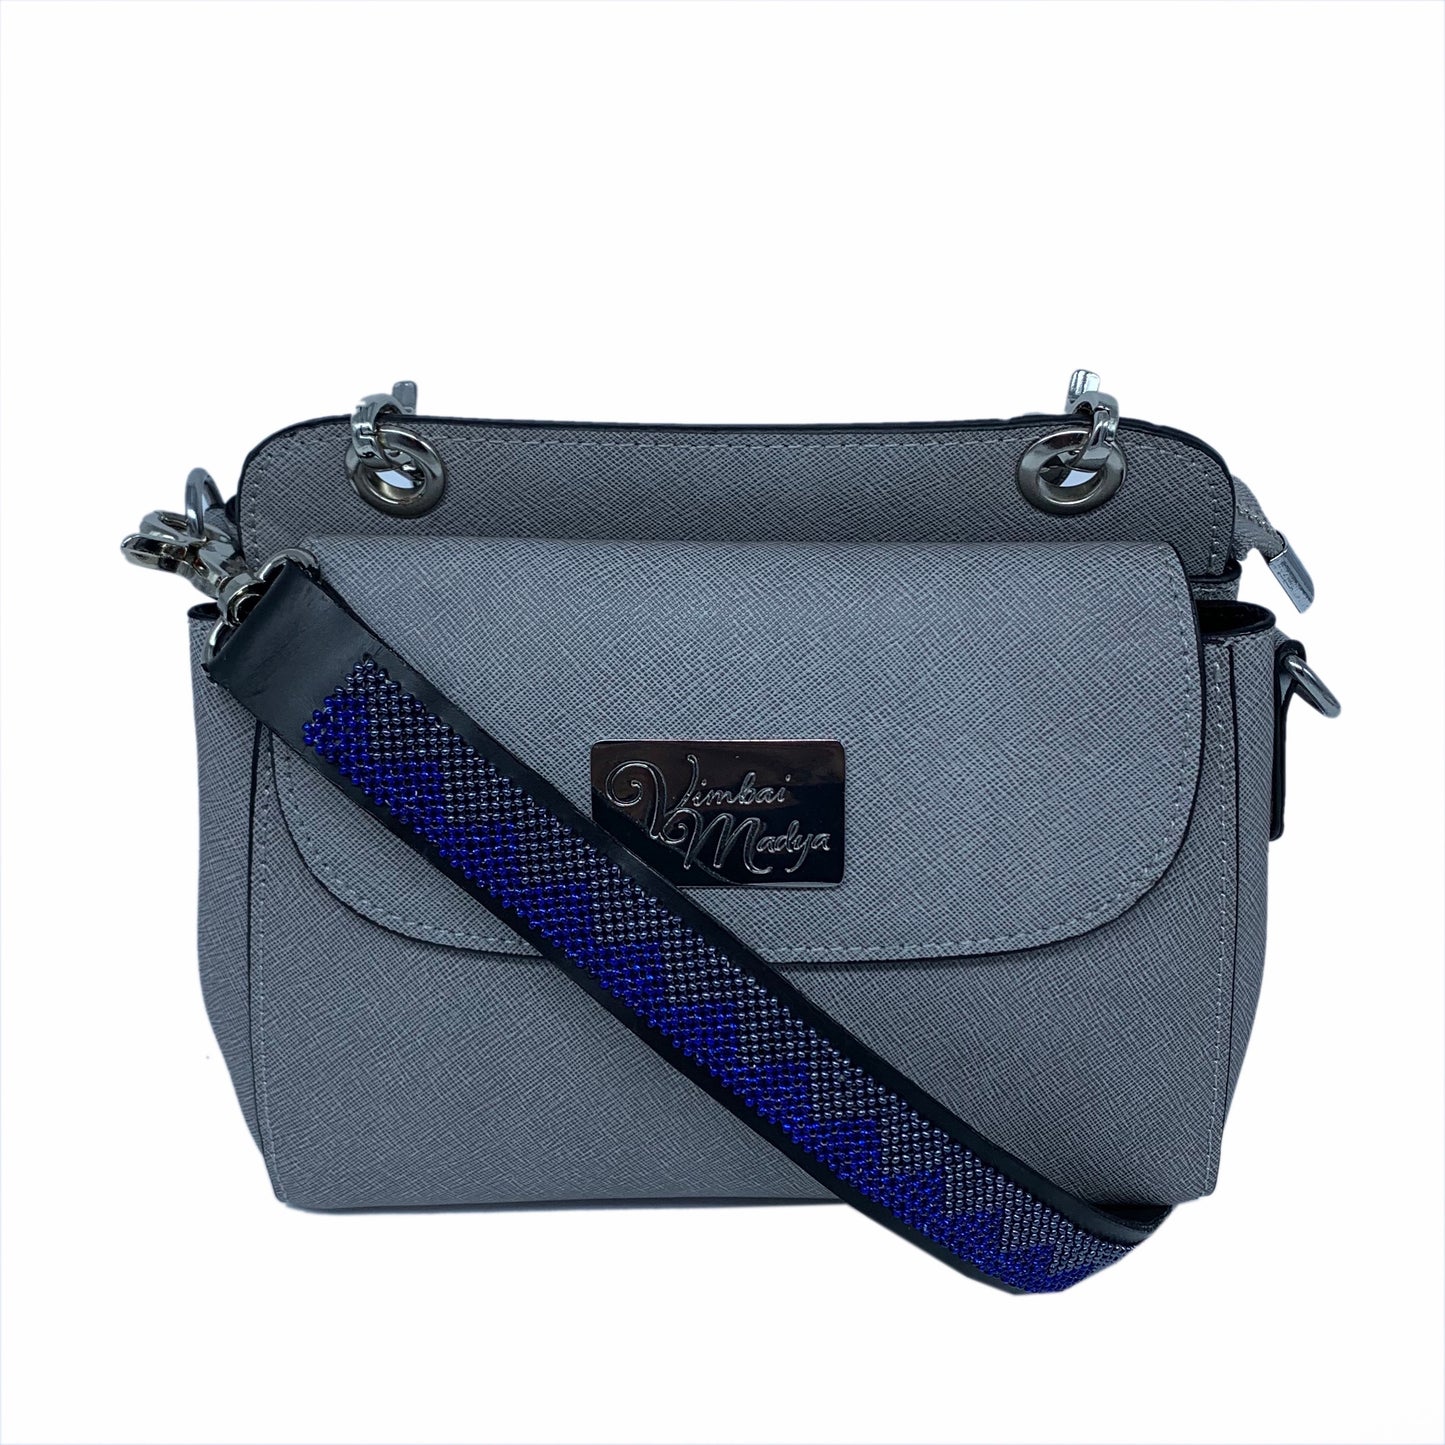 Kenya Mini Leather Bag with interchangeable set of straps and handles